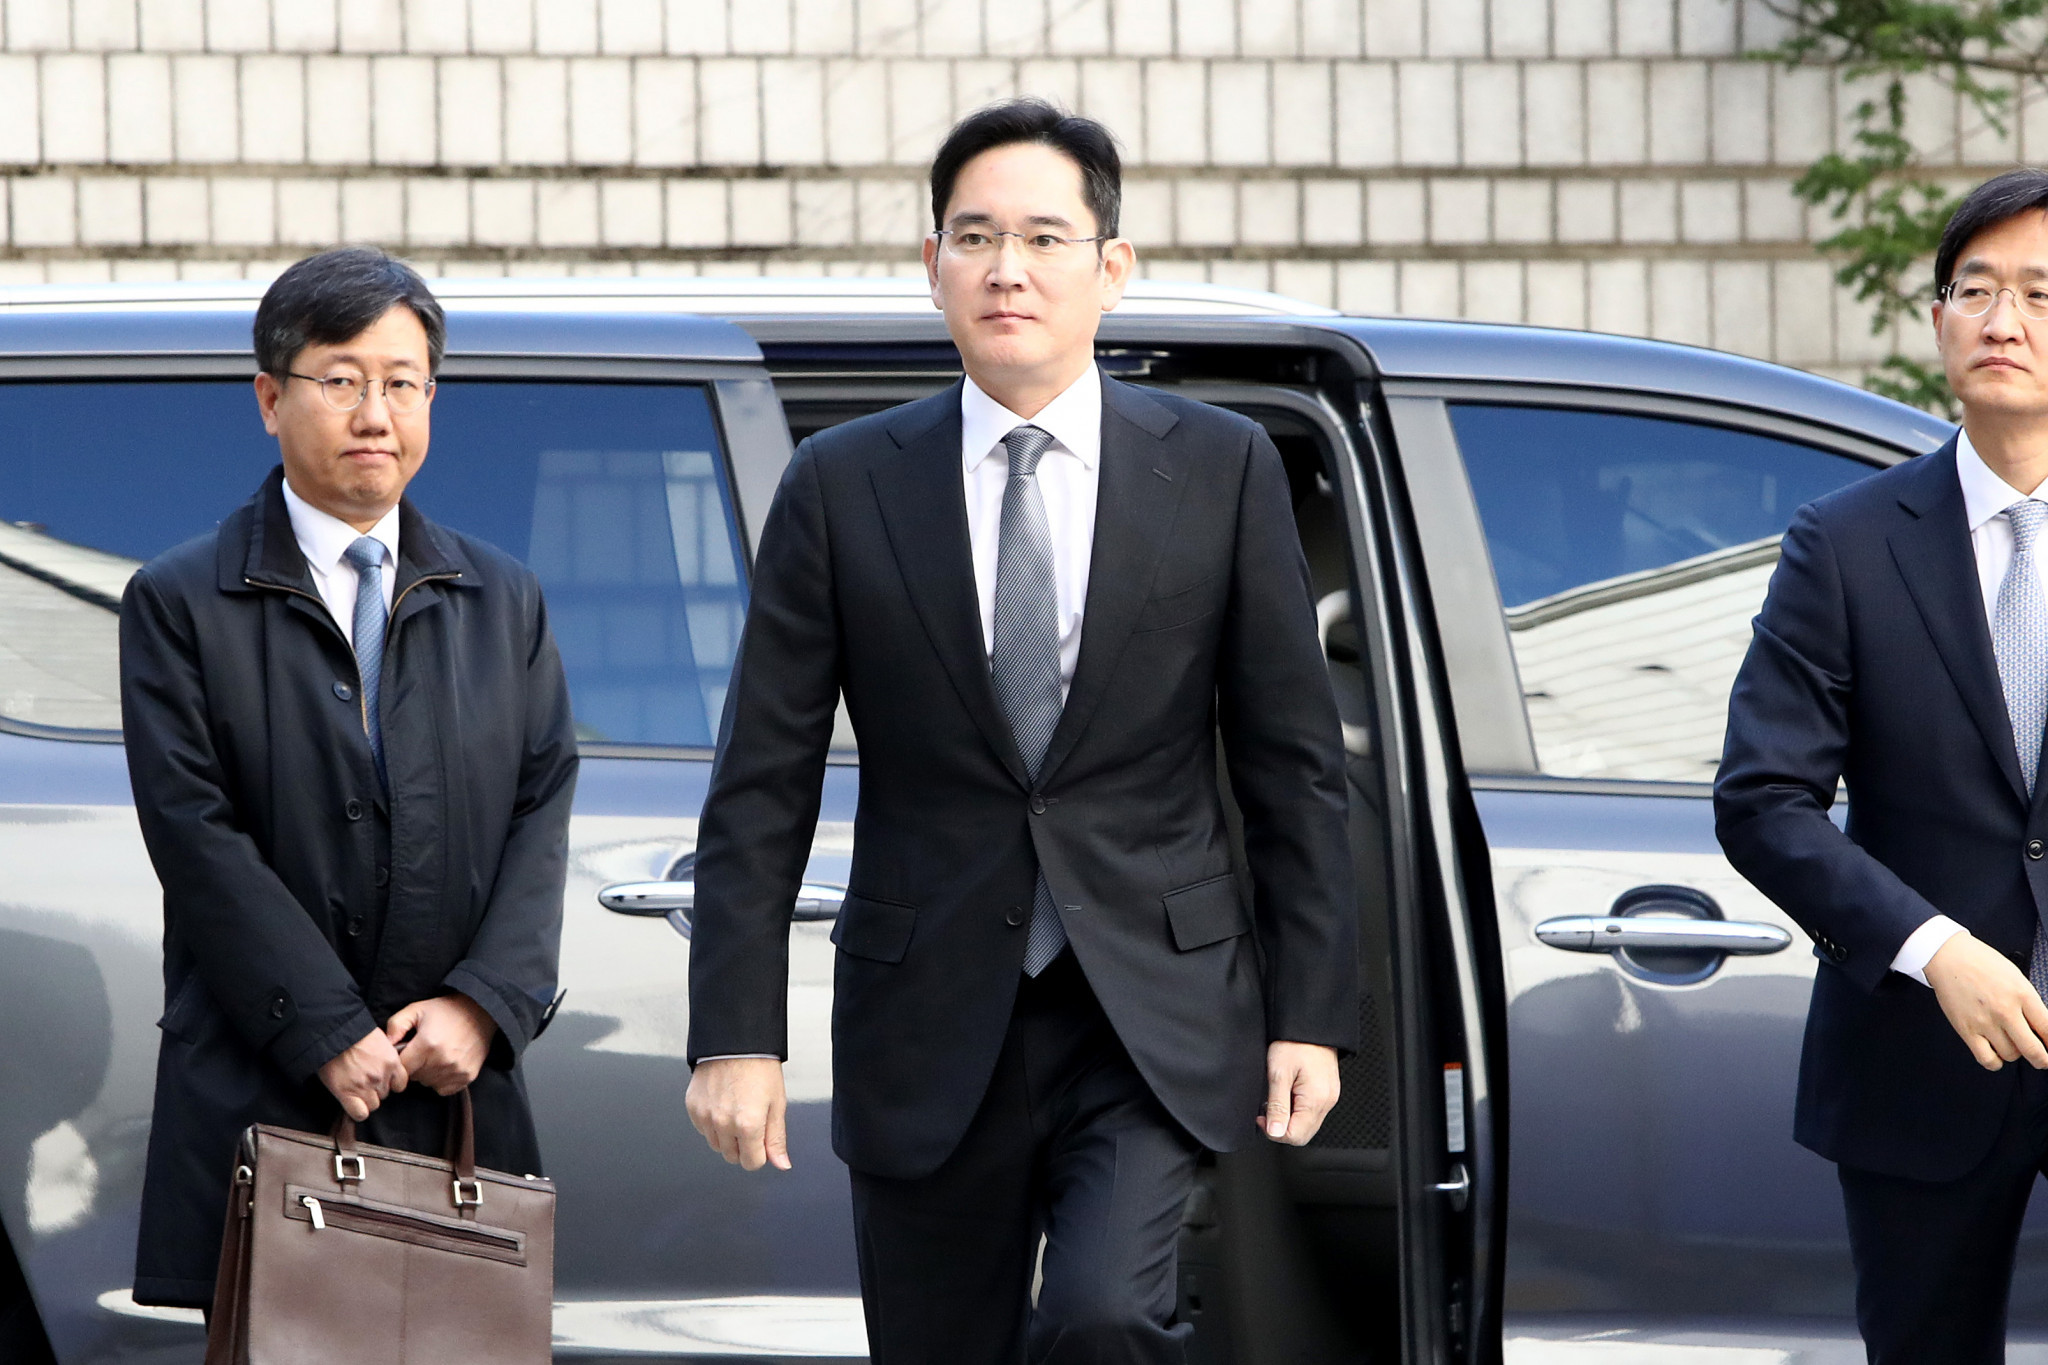 Samsung Electronics Executive Chairman Lee Jae-yong, centre, was pardoned in May ©Getty Images